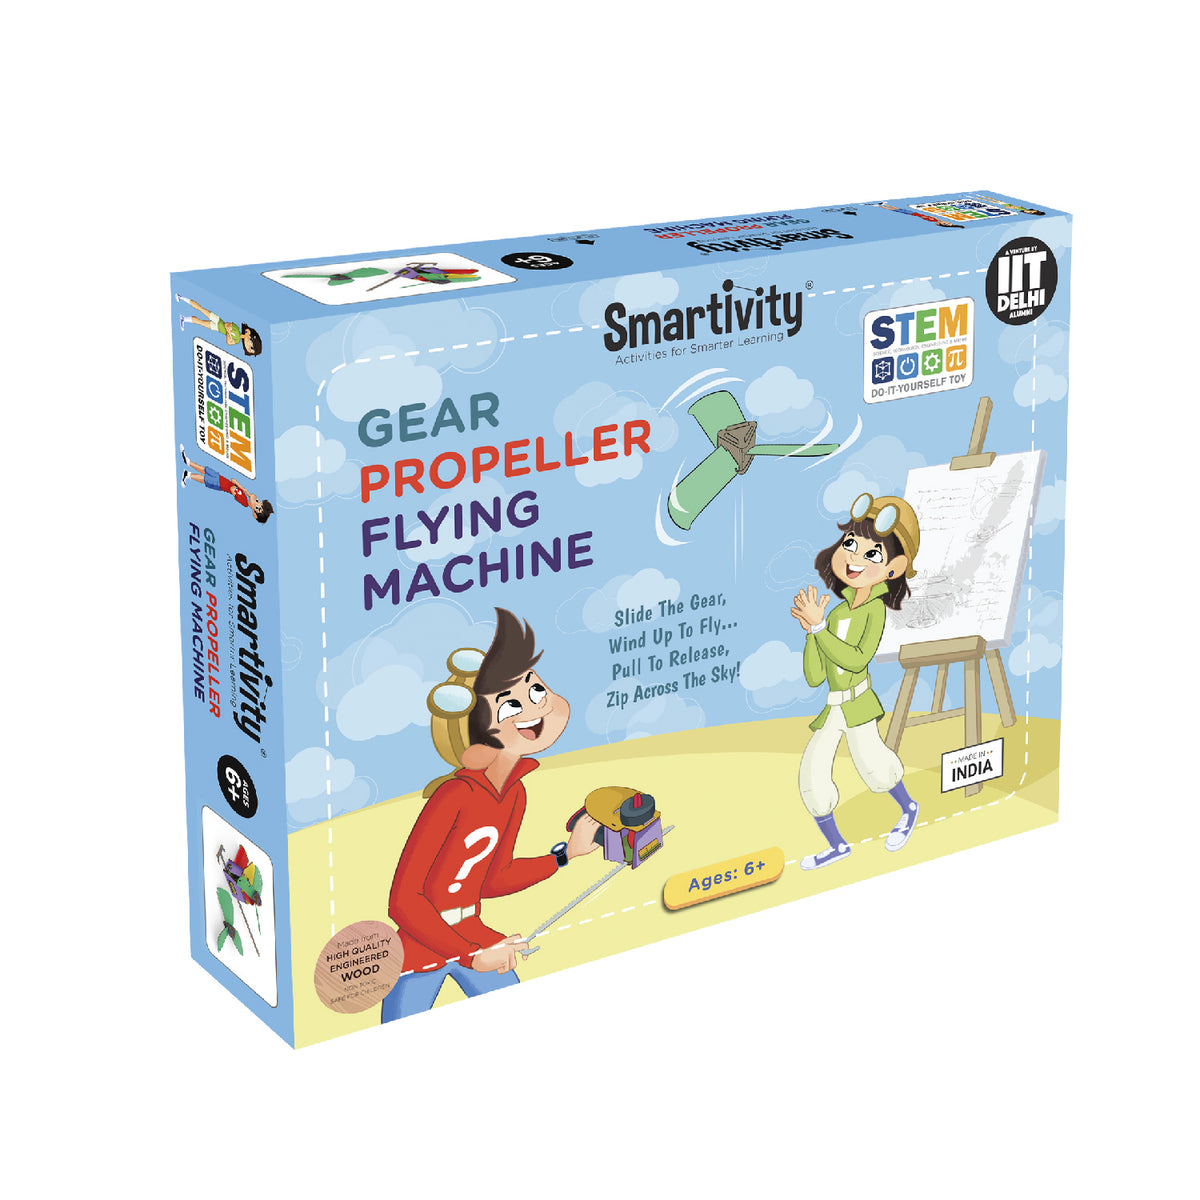 Smartivity - Gear Propeller Flying Machine Toy product image 1